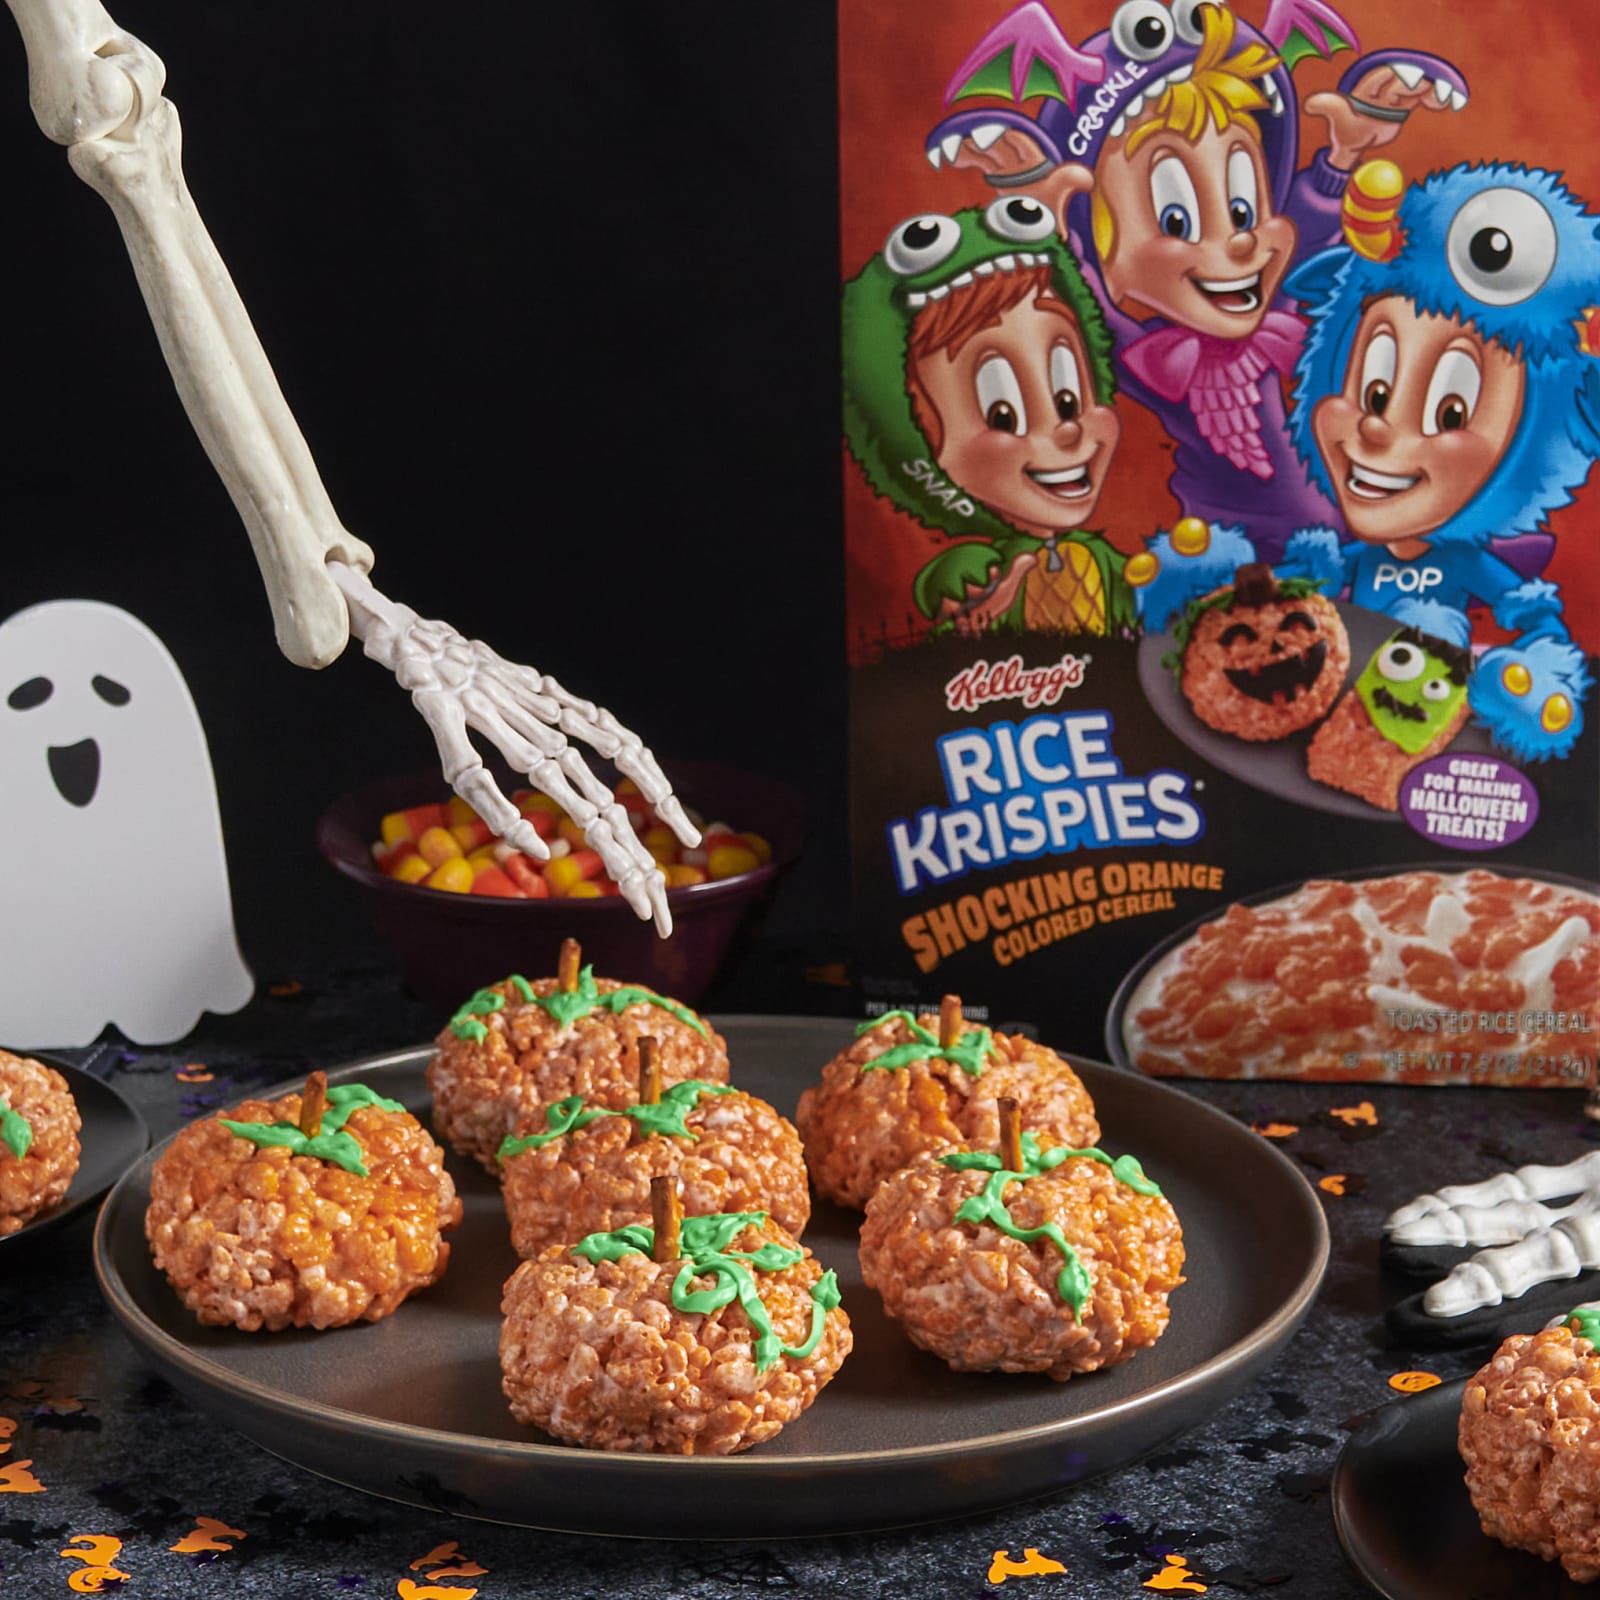 Rice Krispies adds Shocking Orange cereal to their lineup